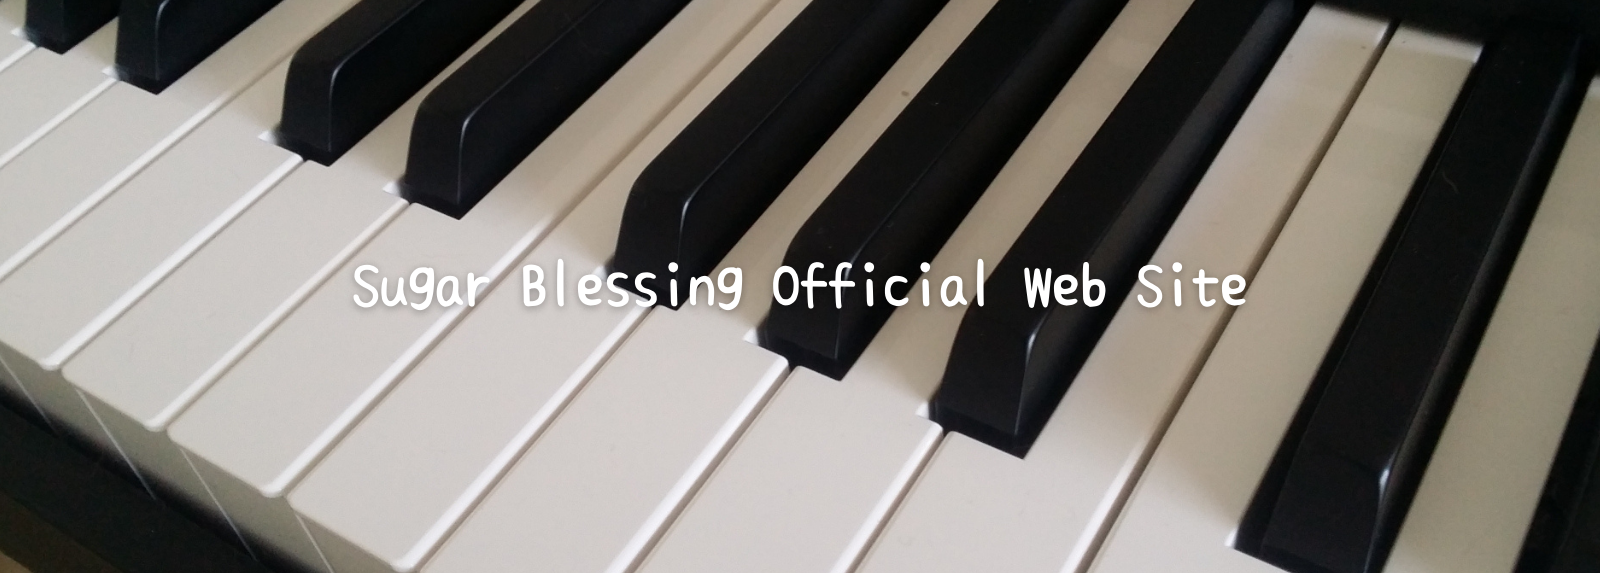 Sugar Blessing Official Web Site